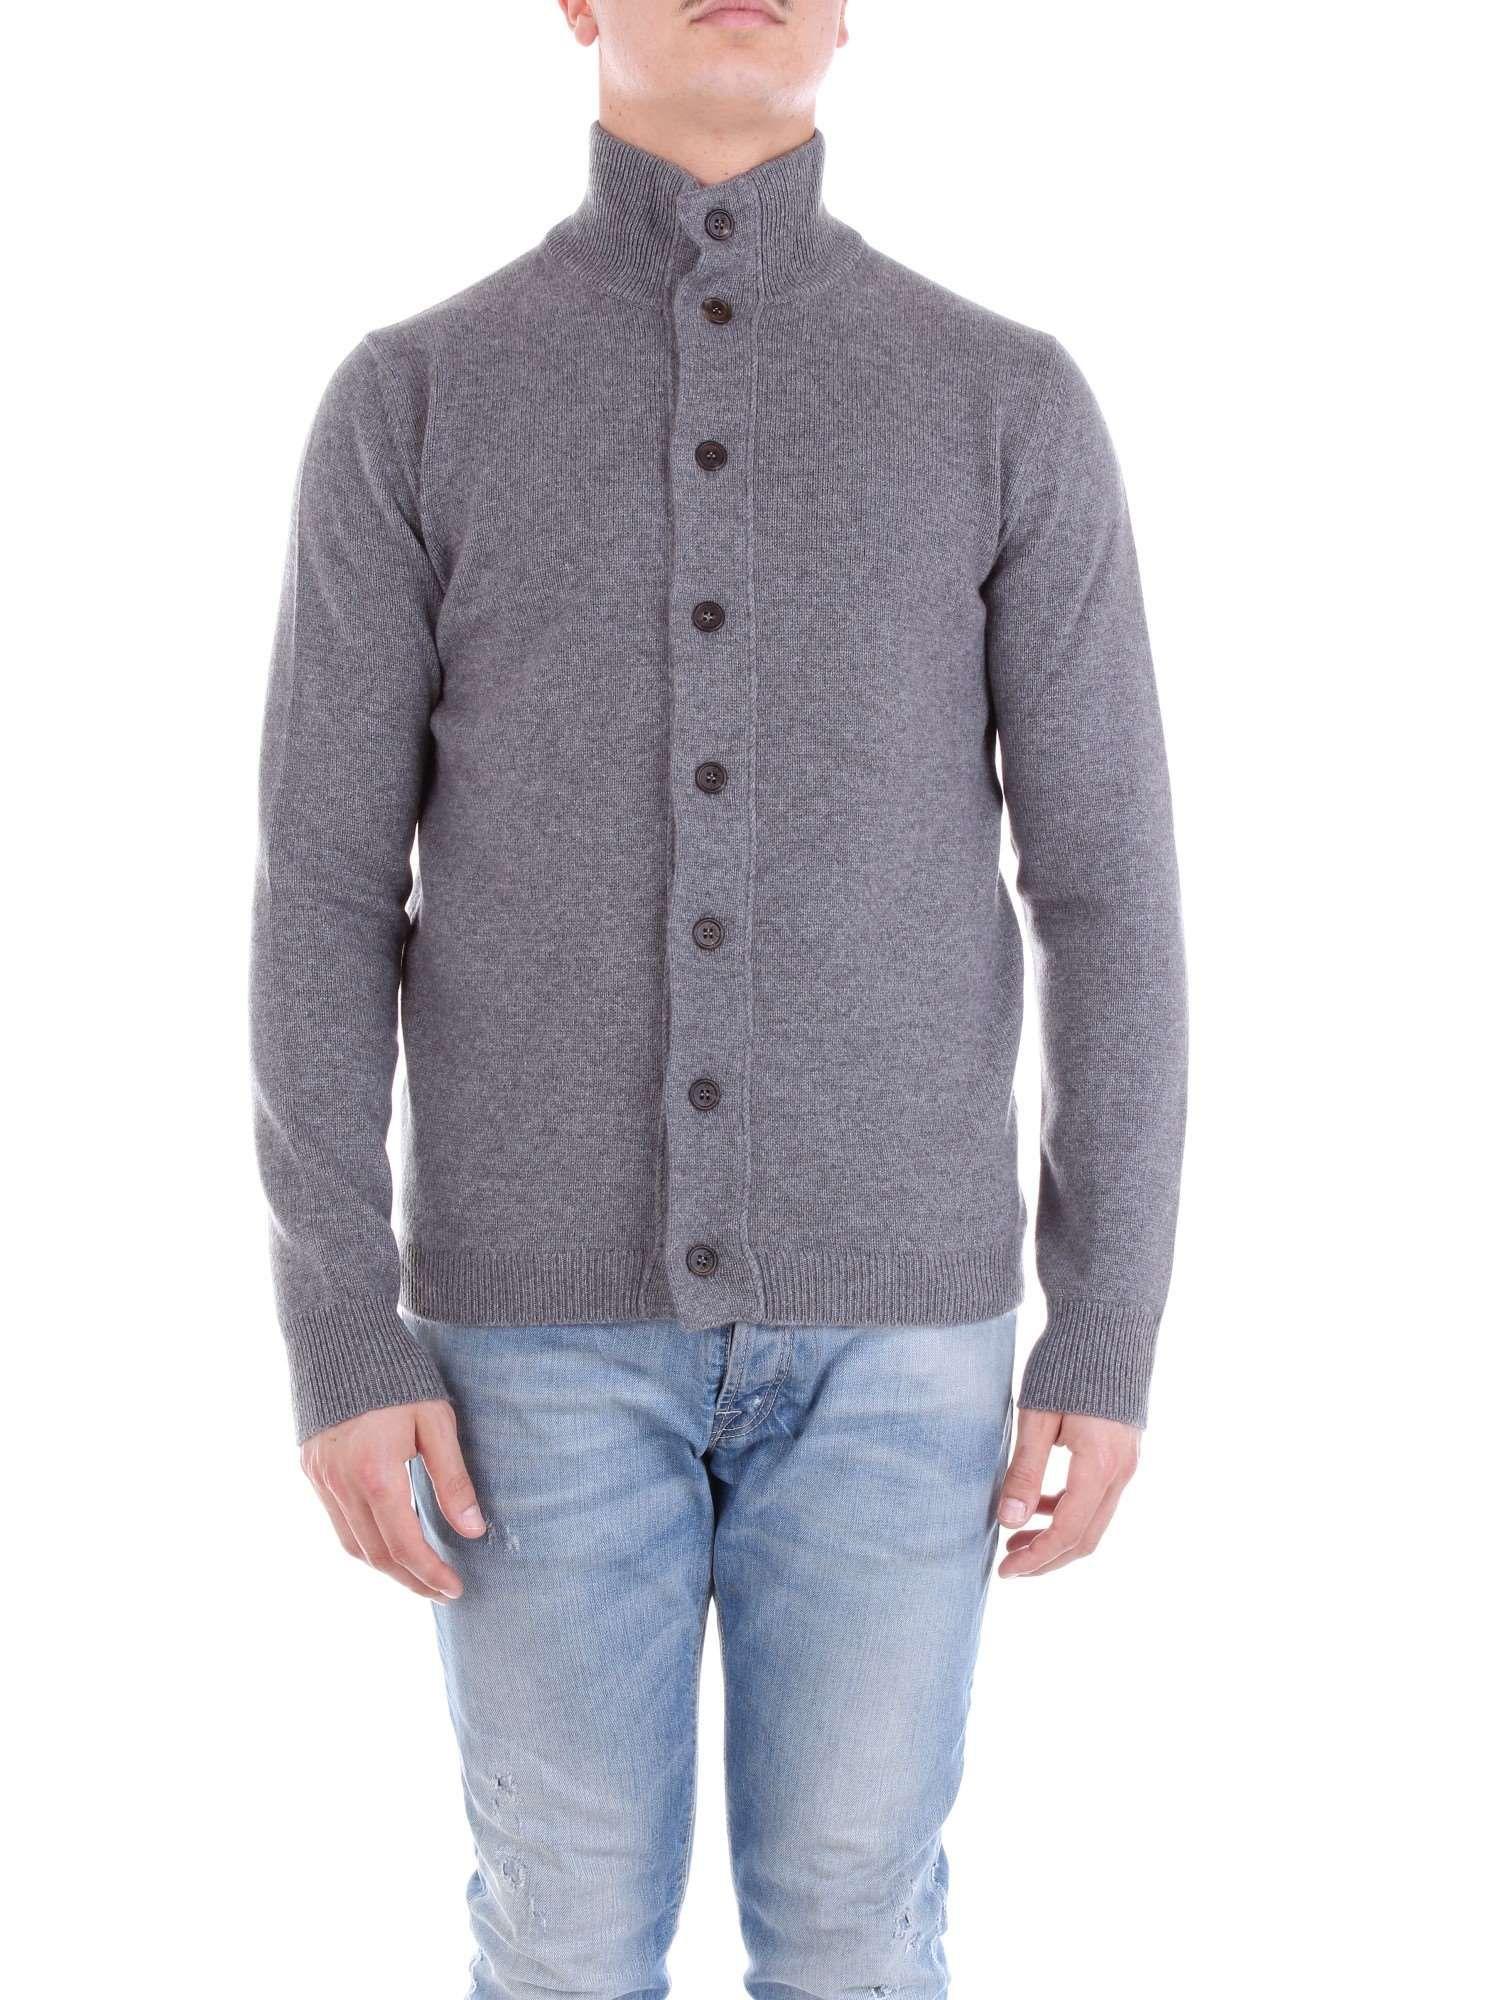 Cruciani Grey Cashmere Cardigan in Gray for Men - Lyst